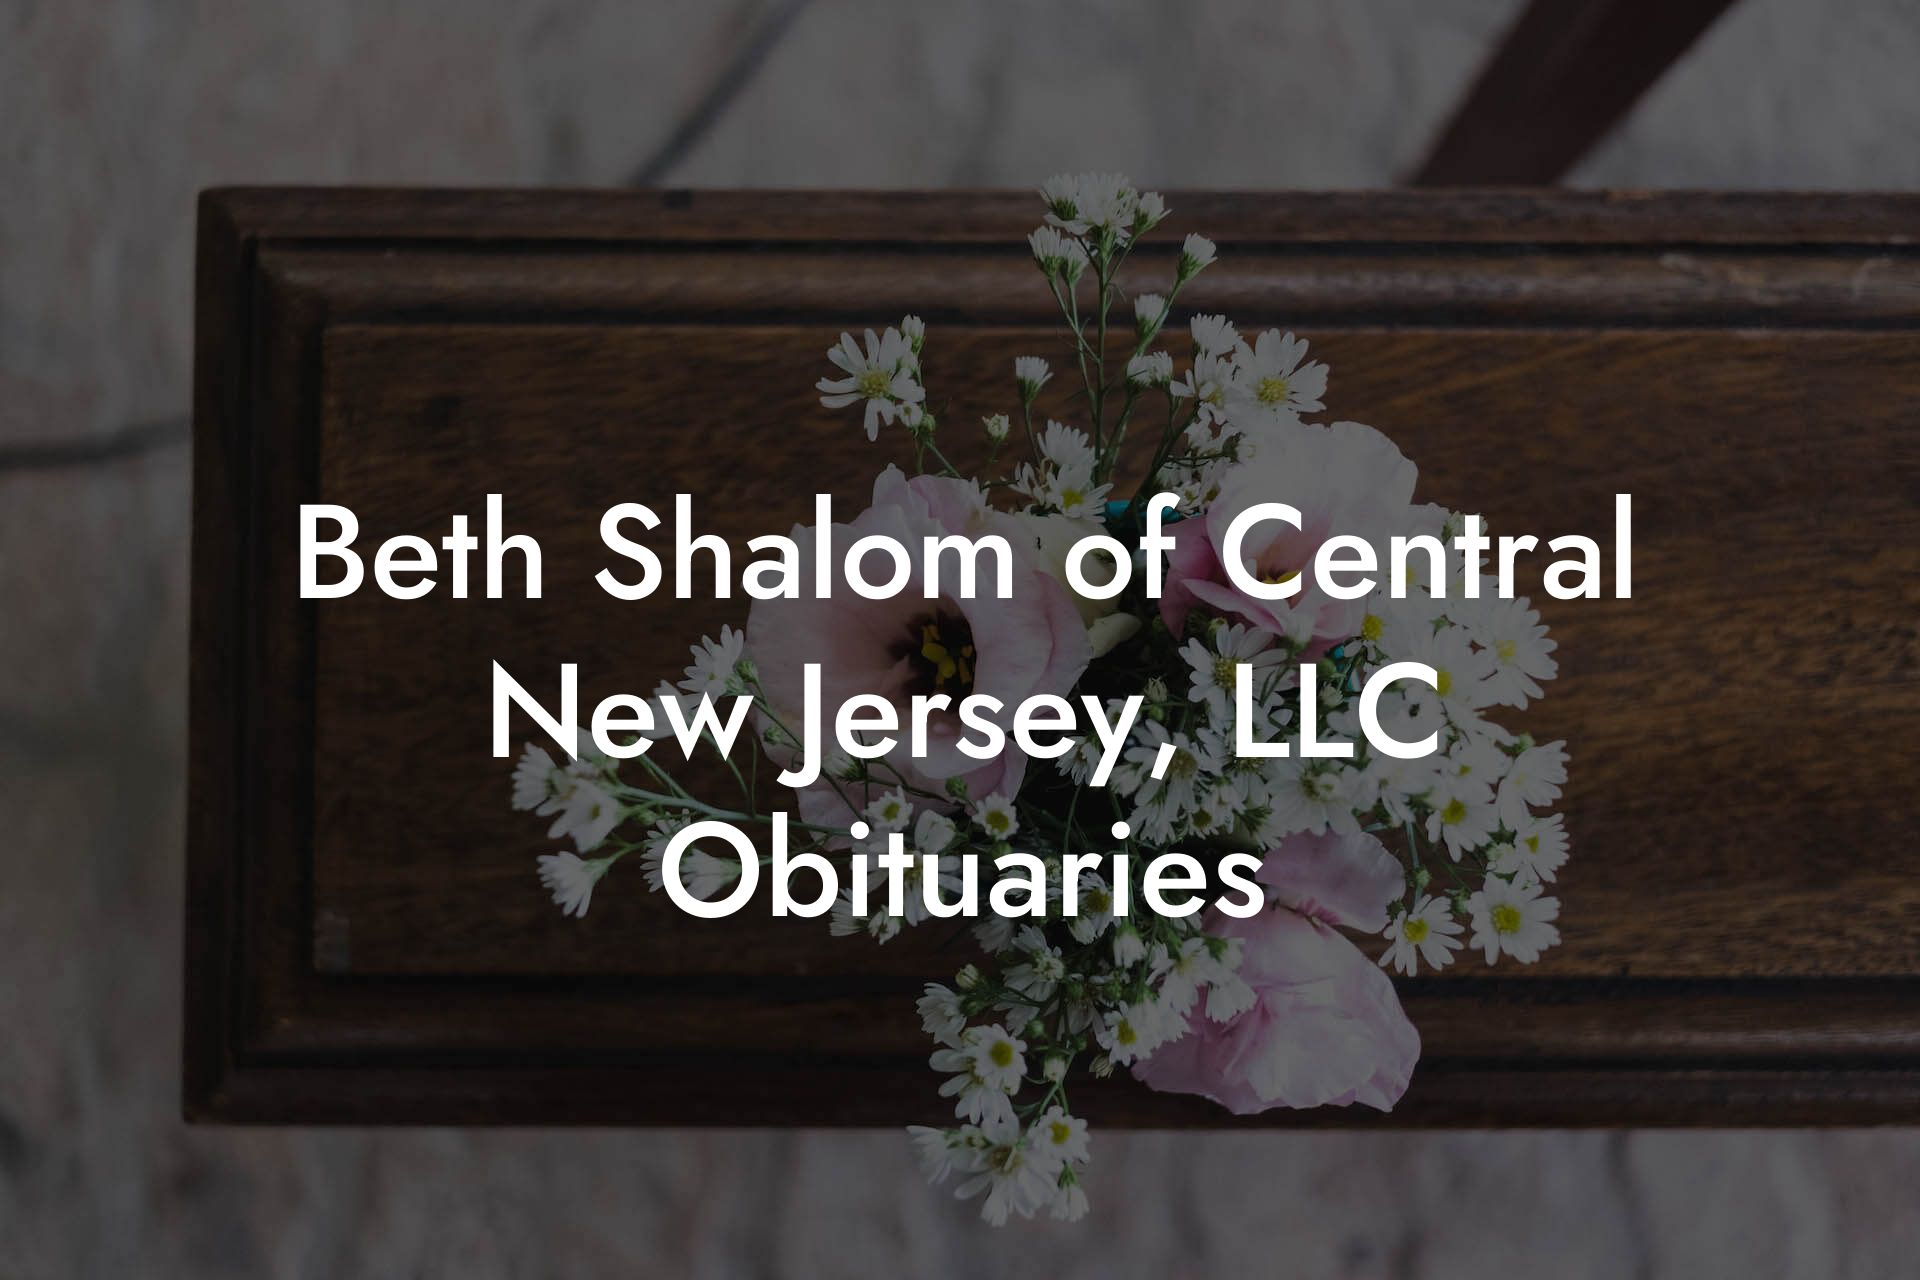 Beth Shalom of Central New Jersey, LLC Obituaries